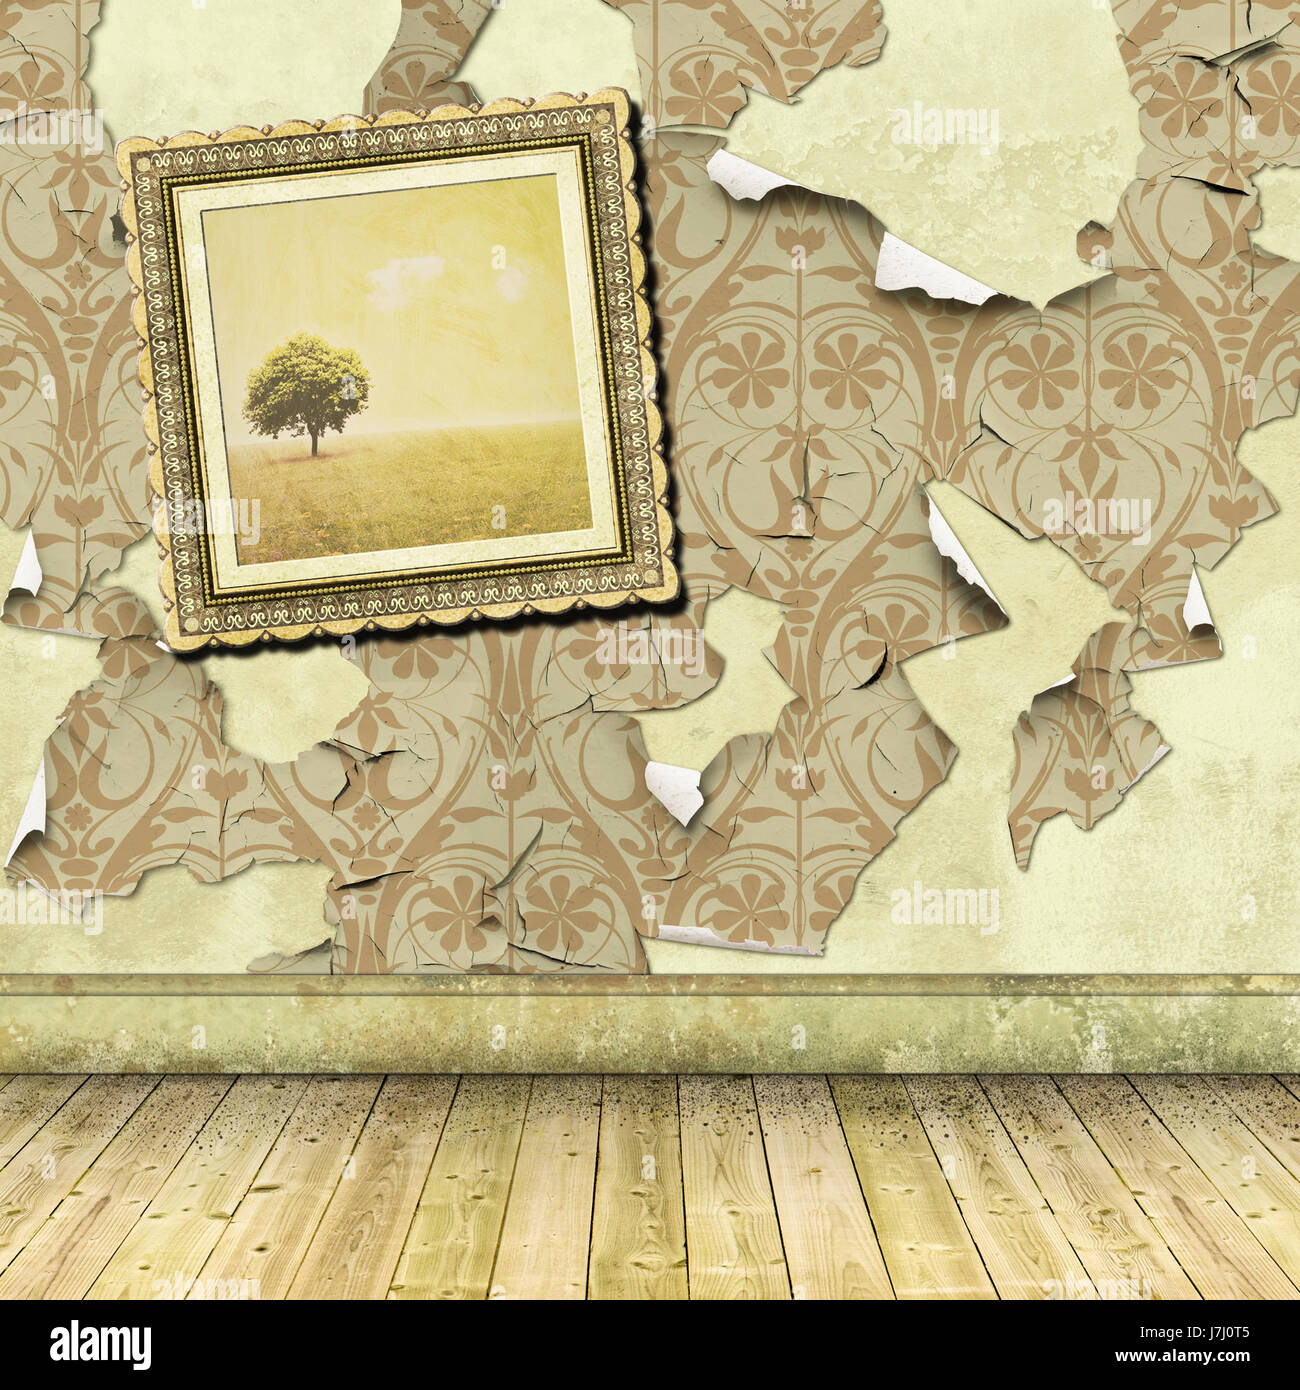 16800 Torn Wall Paper Stock Photos Pictures  RoyaltyFree Images   iStock  Torn wallpaper Torn paper